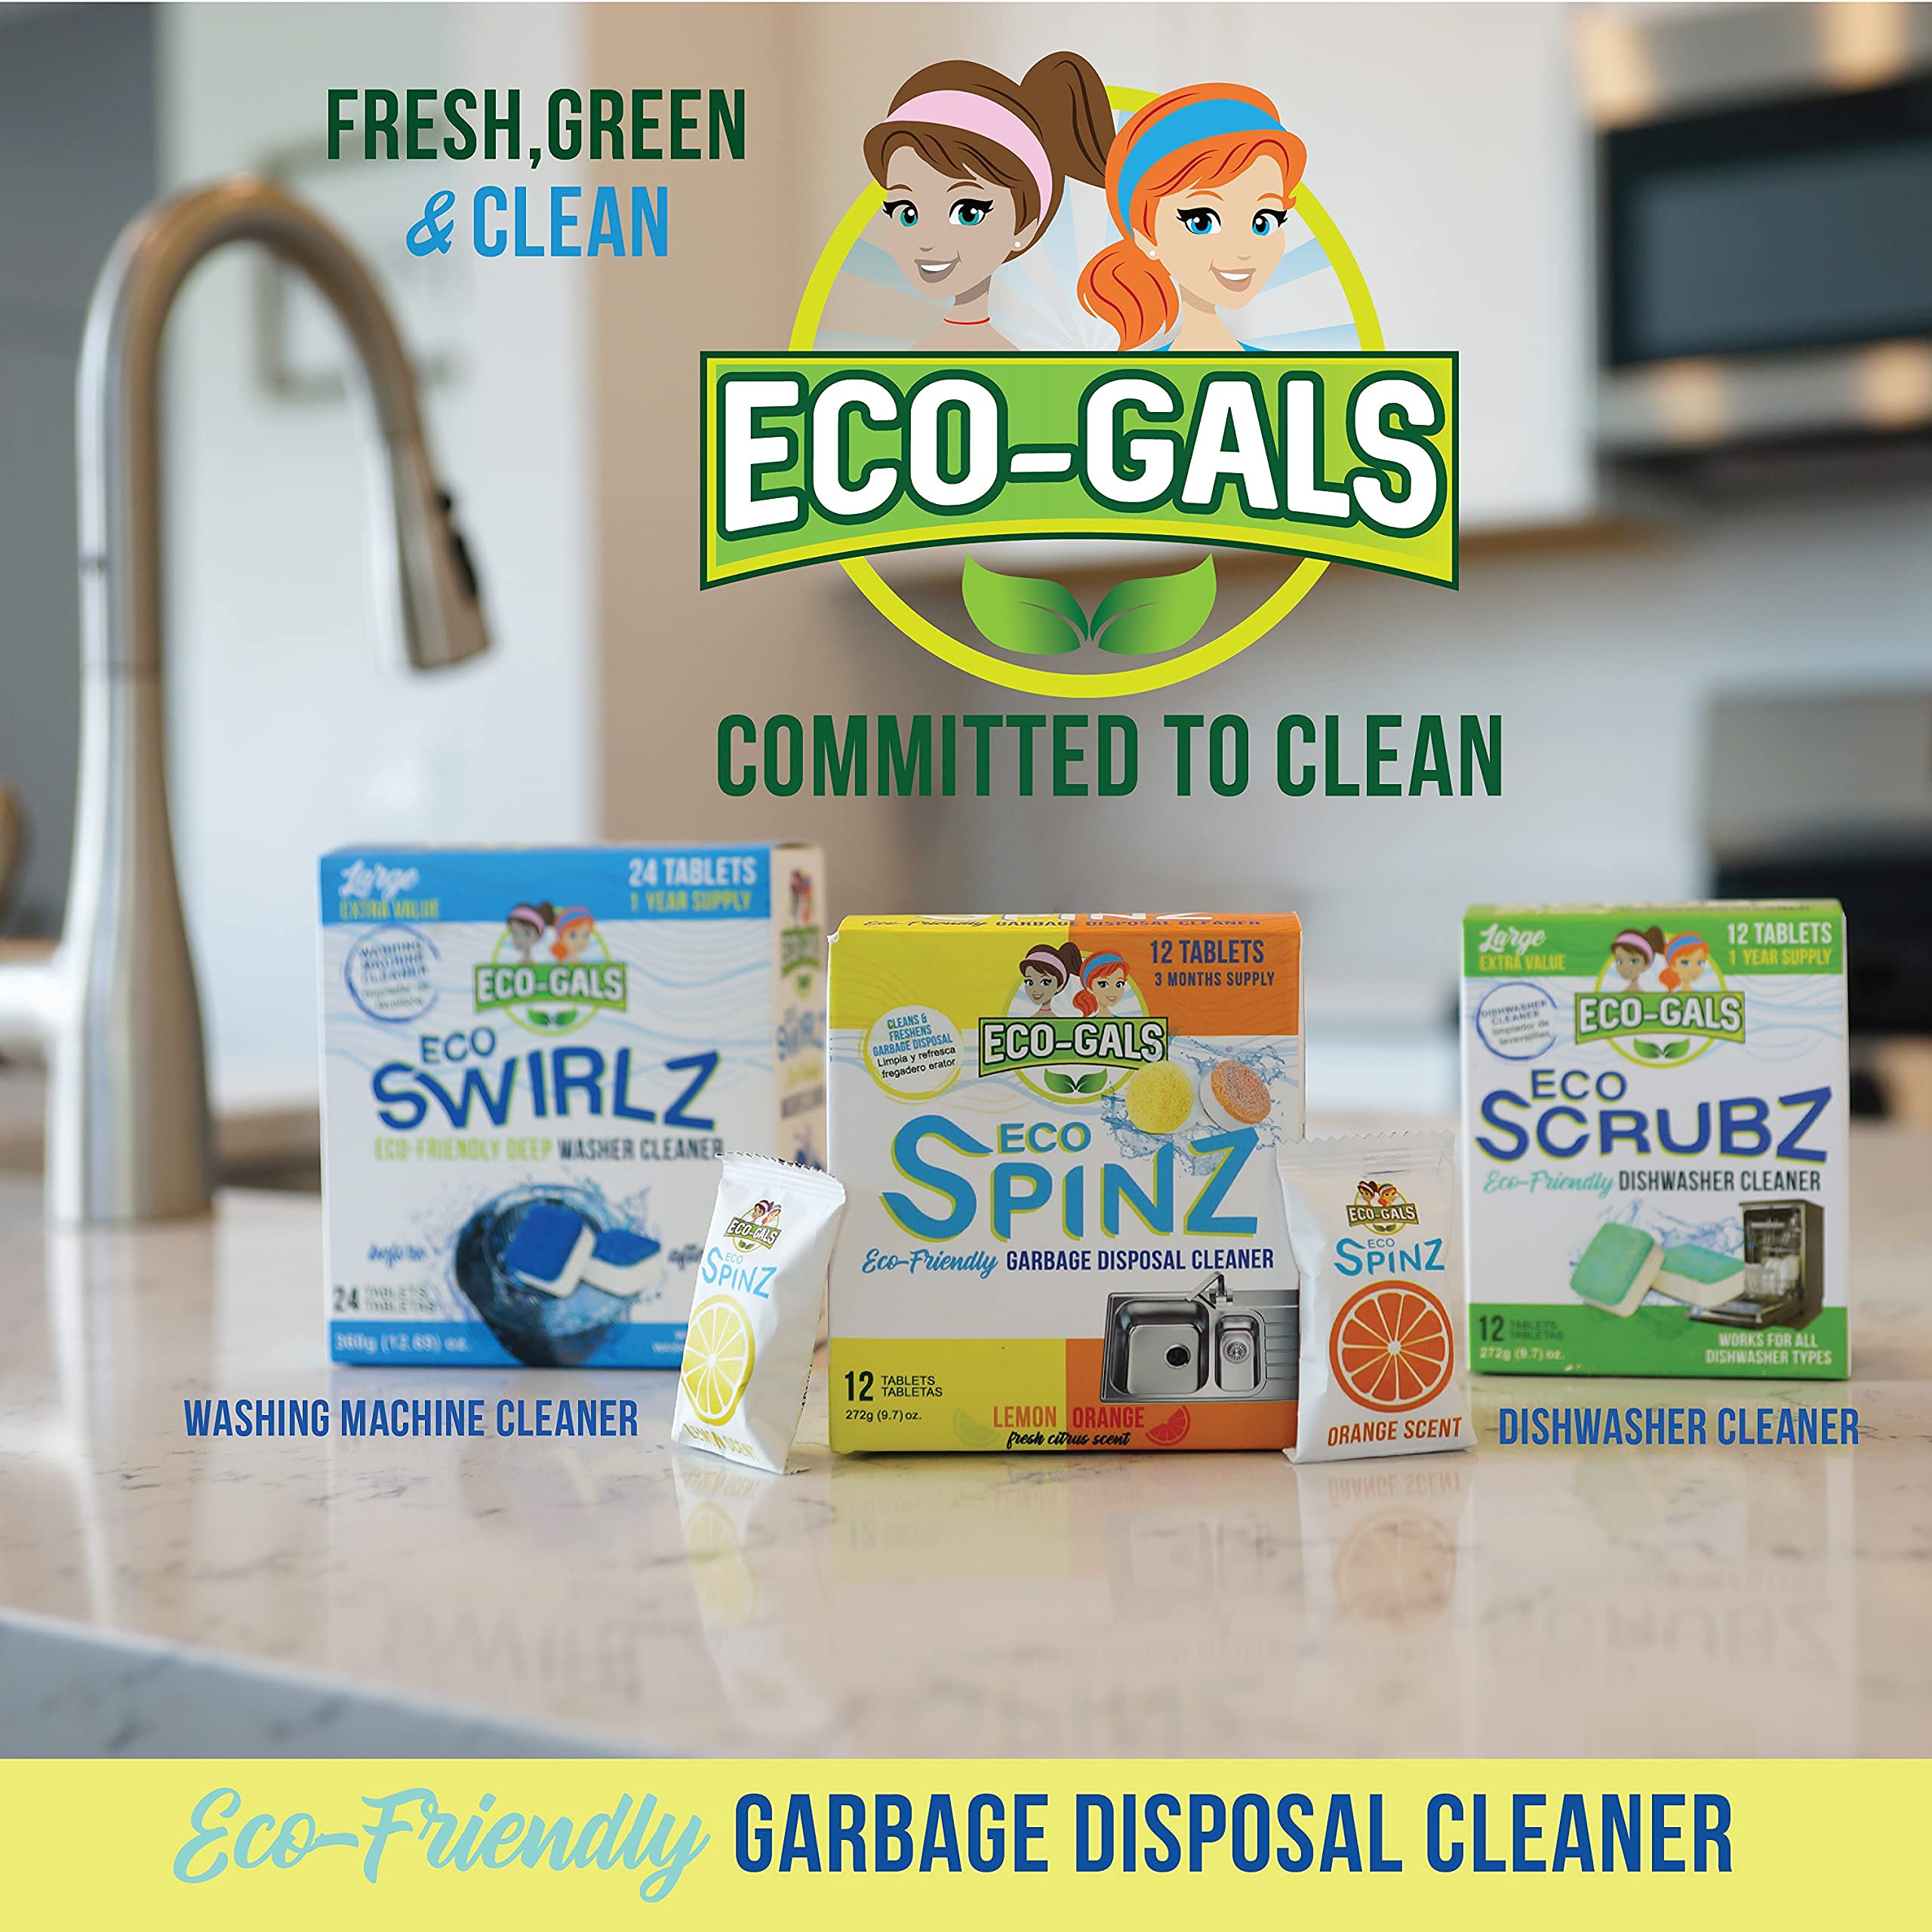 Eco-Gals Unscented Dishwashing Machine Cleaner and dishwasher clean/dirty indicator combo kit